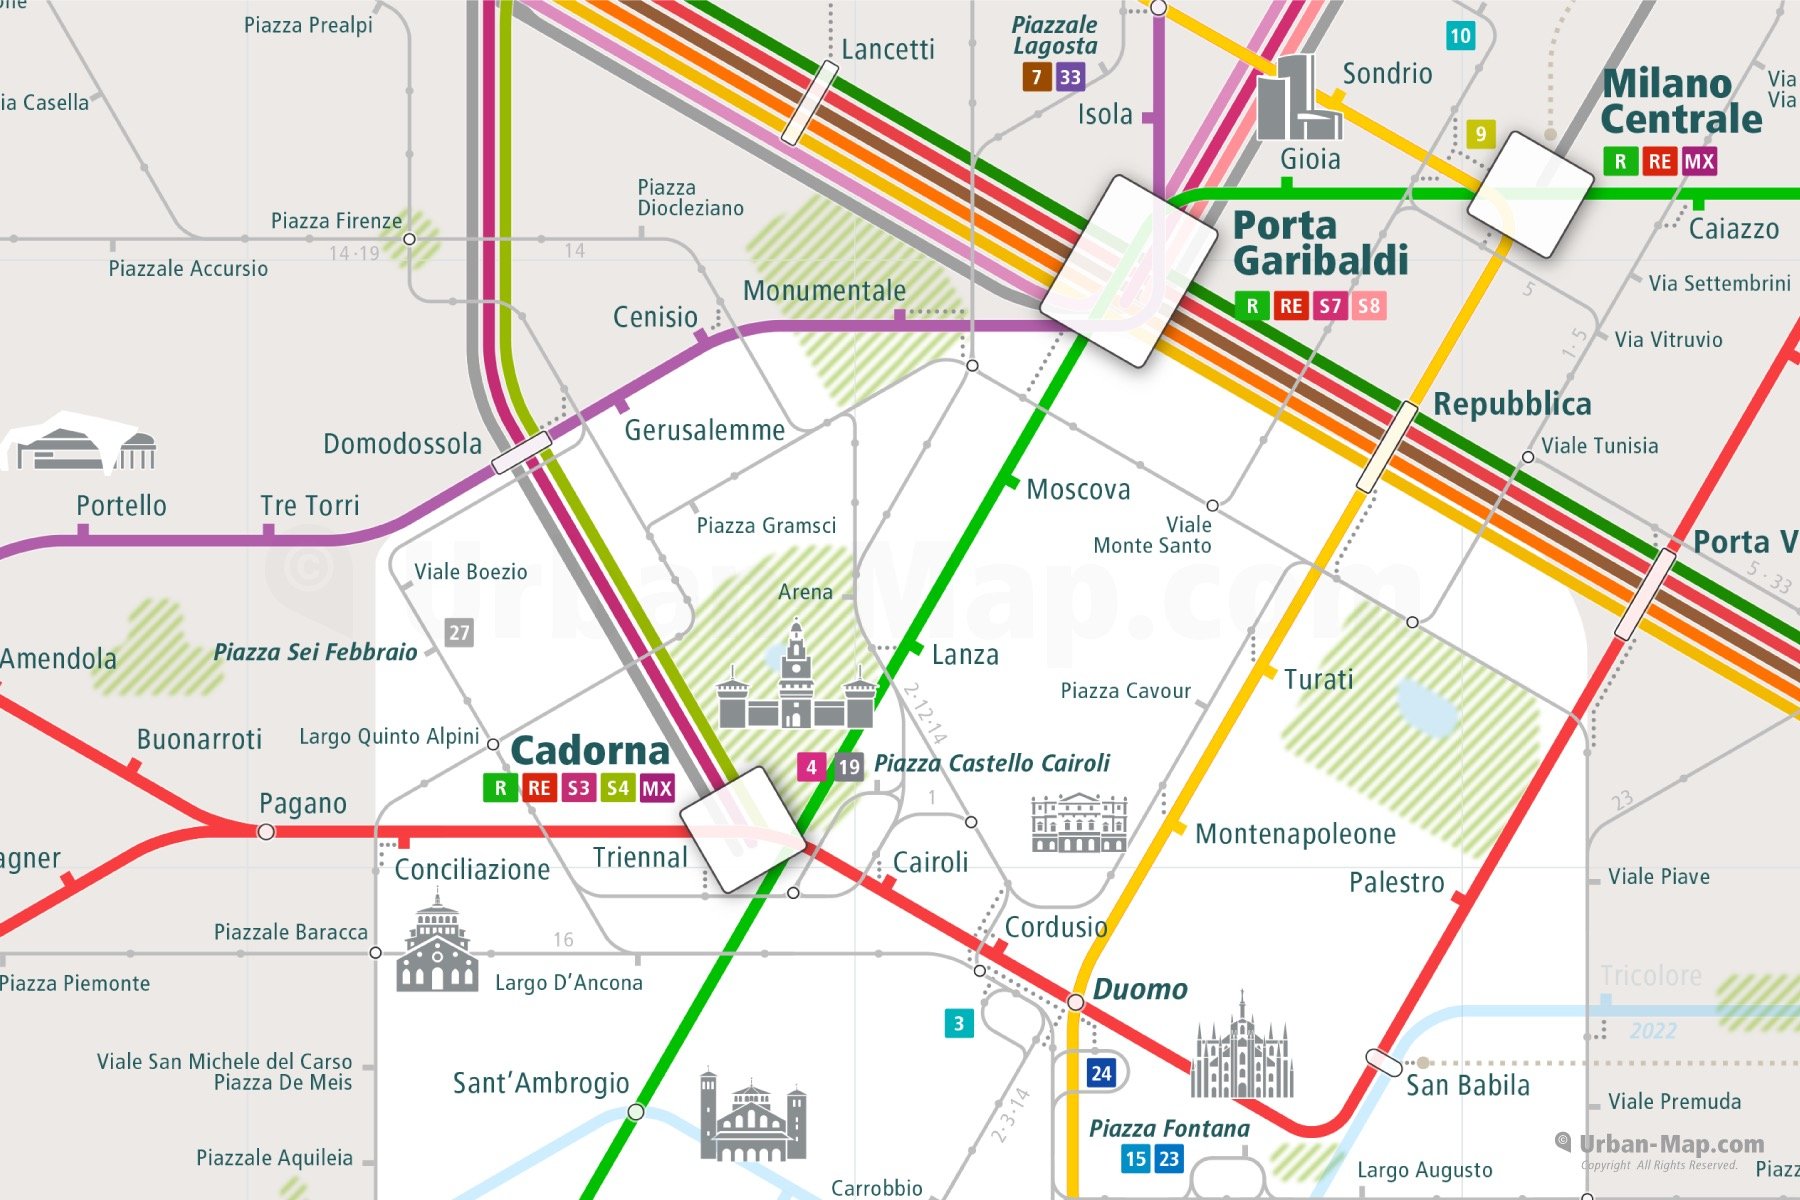 Milan City Rail Map shows the train and public transportation routes of metro, commuter train, tram - Close-Up